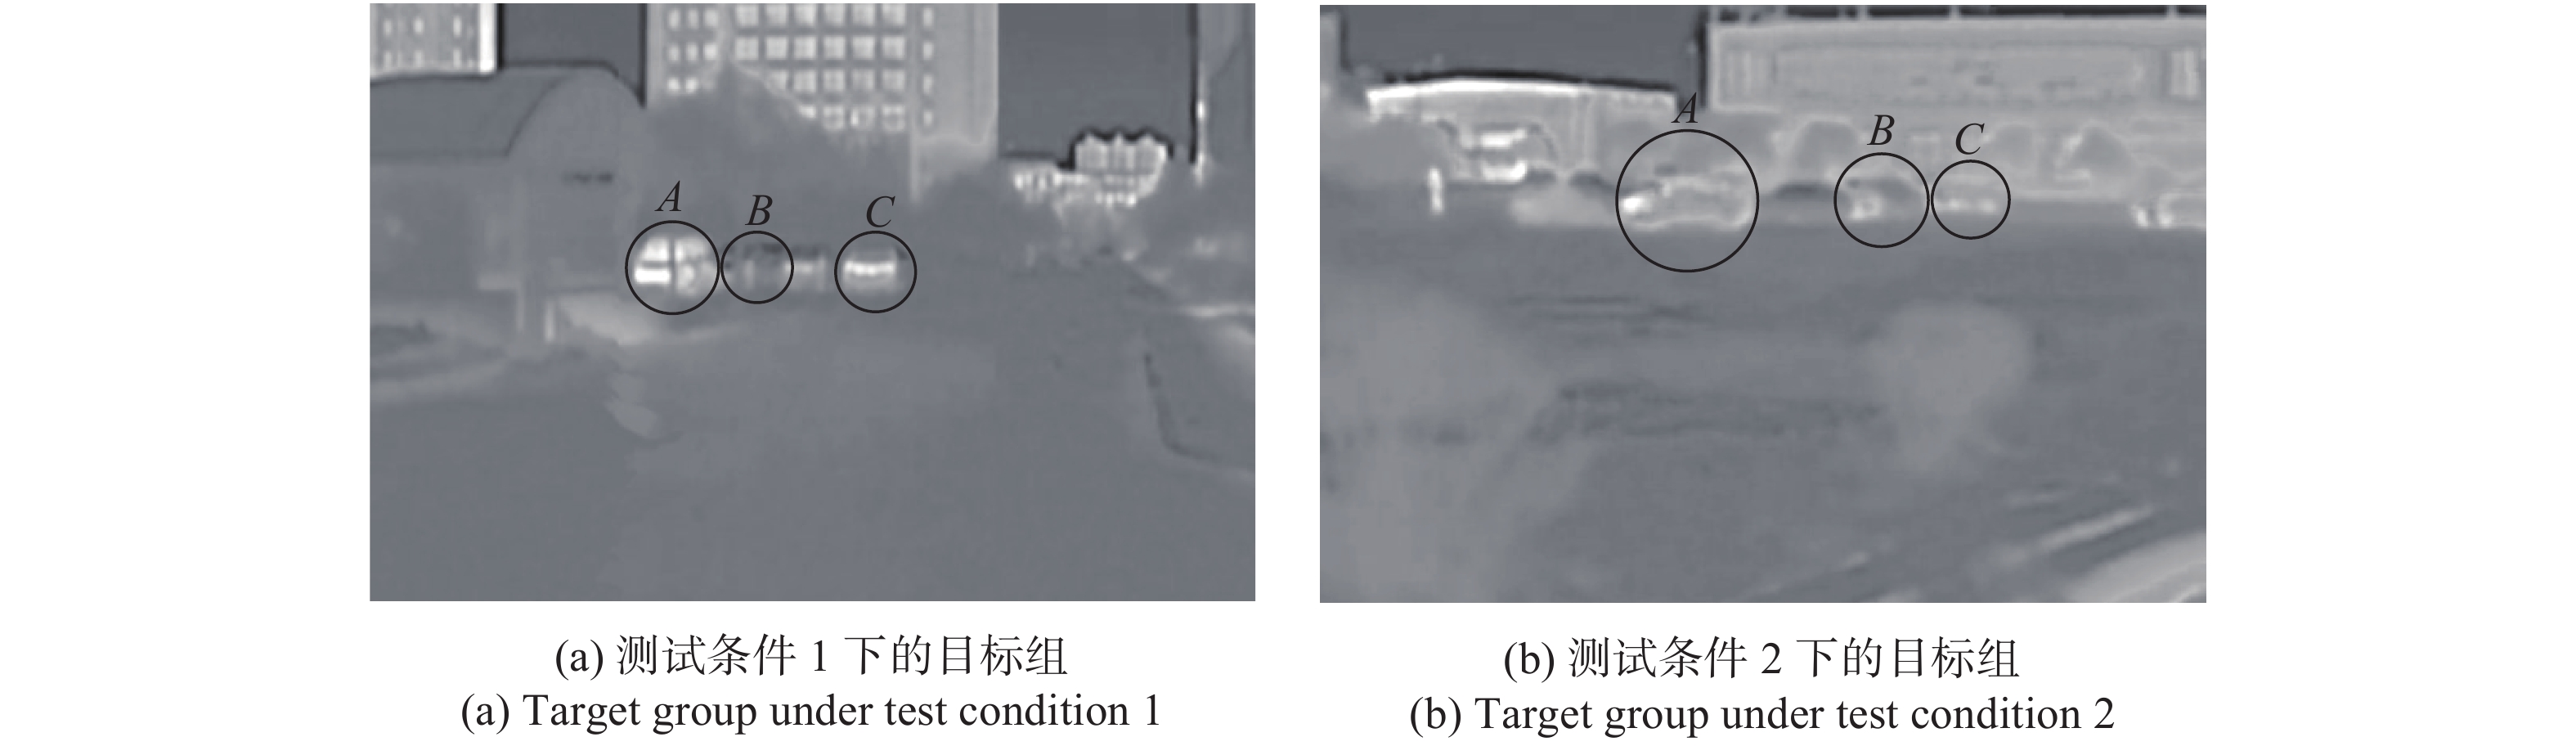 Target recognition effect based on traditional spectral feature analysis